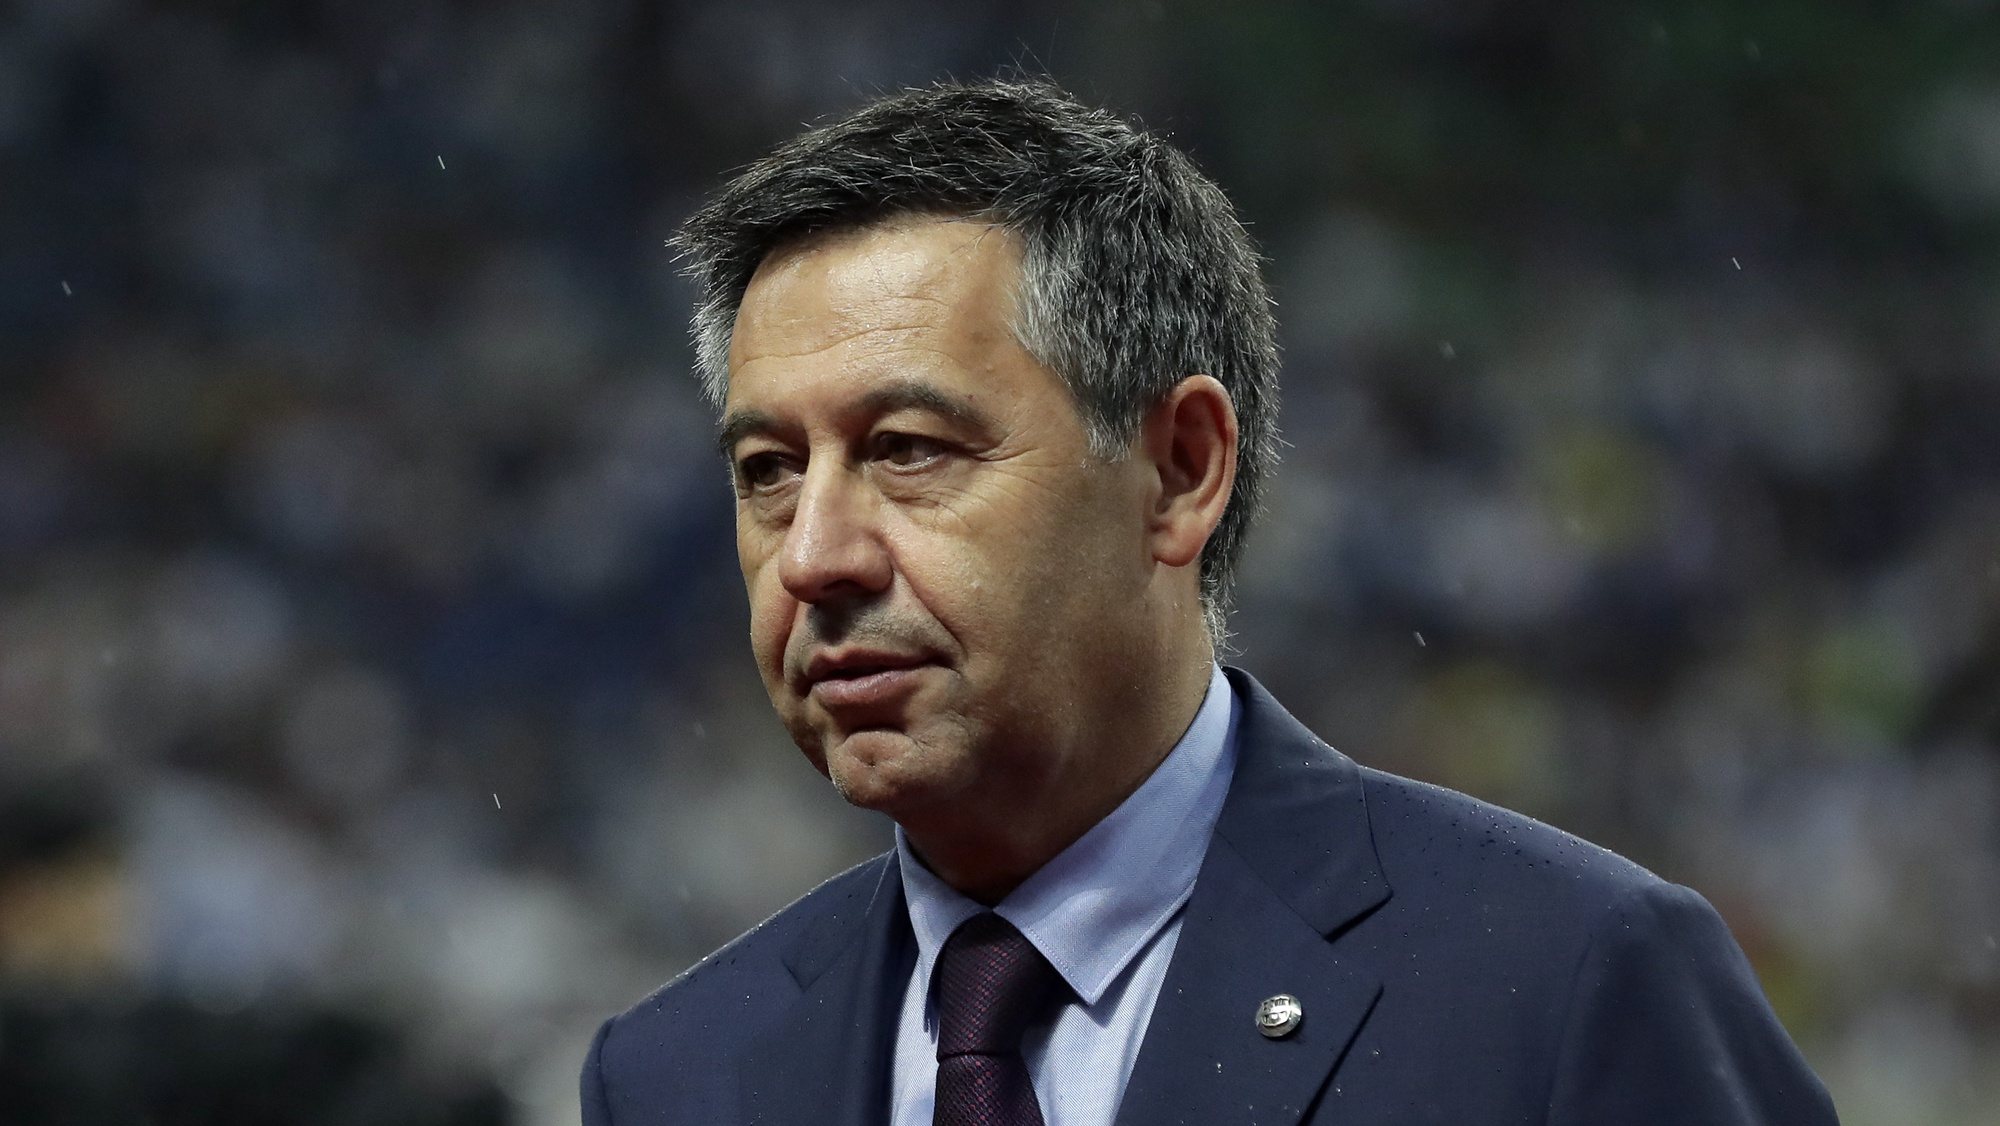 epa09044591 (FILE) - FC Barcelona&#039;s President Josep Maria Bartomeu is seen before a pre-season friendly soccer match between FC Barcelona and Chelsea FC in Saitama, north of Tokyo, Japan, 23 July 2019 (re-issued on 01 March 2021). Former FC Barcelona president Josep Maria Bartomeu, along with former director of the presidency area Jaume Masferrer, current director general of the club, Oscar Grau and head of the legal services ​​Roman Gomez Ponti, was arrested on 01 March 2021 as part of the investigation known as &#039;BarcaGate&#039;, judicial sources confirmed to Spanish national agency EFE.  EPA/KIYOSHI OTA *** Local Caption *** 55357134